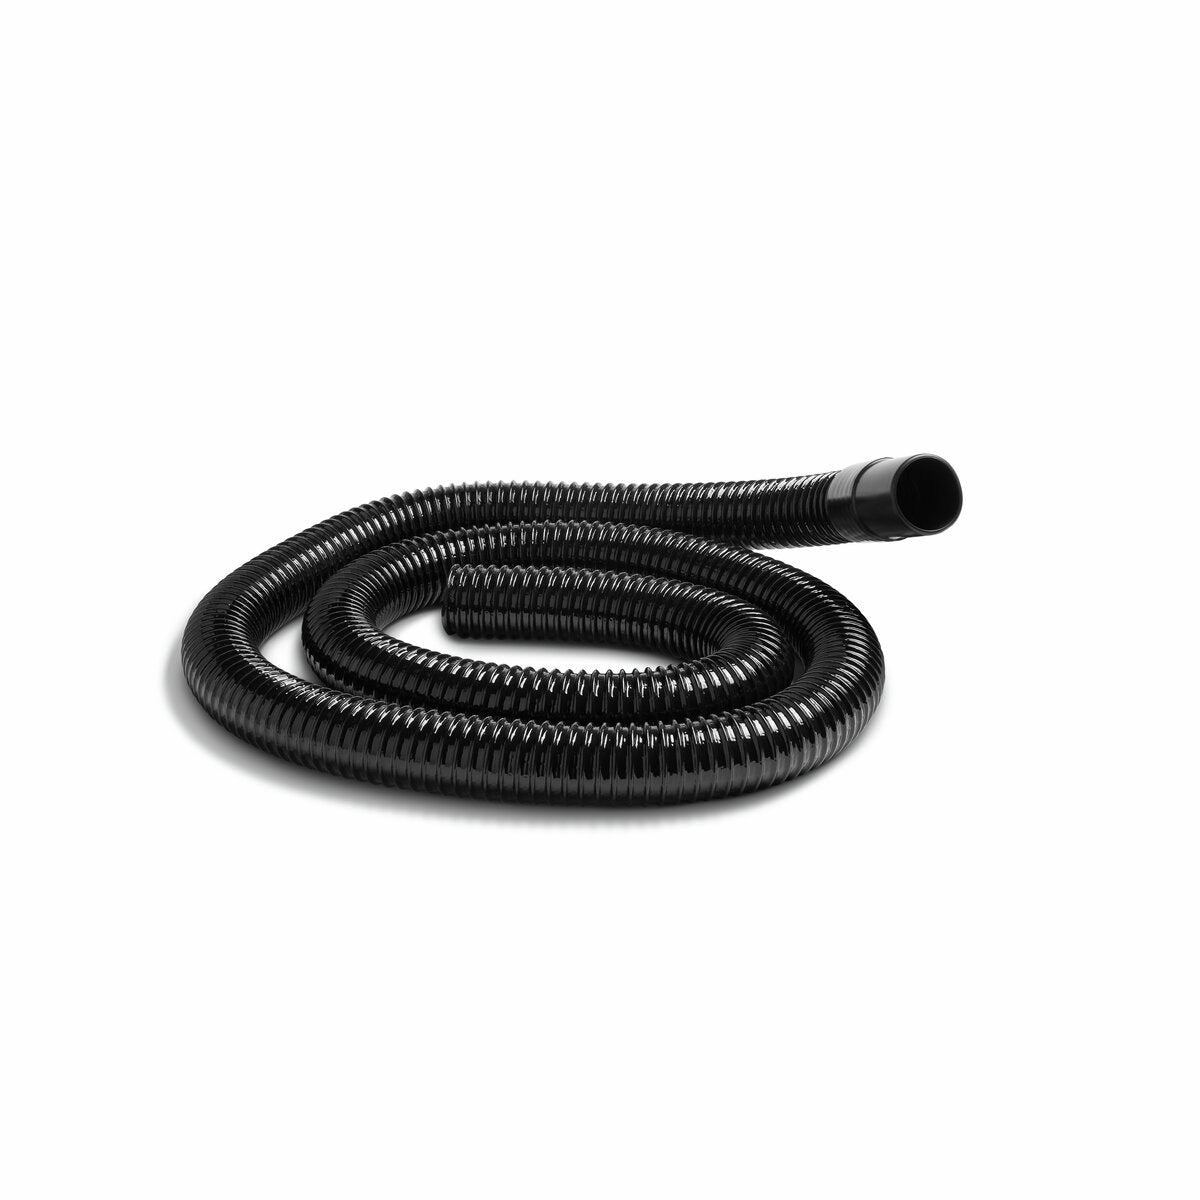 Lincoln Electric - Extraction Hose with Adapters, 1-3/4 in. (45mm) Diameter x 8 ft. (2.5m) Length - K2389-9